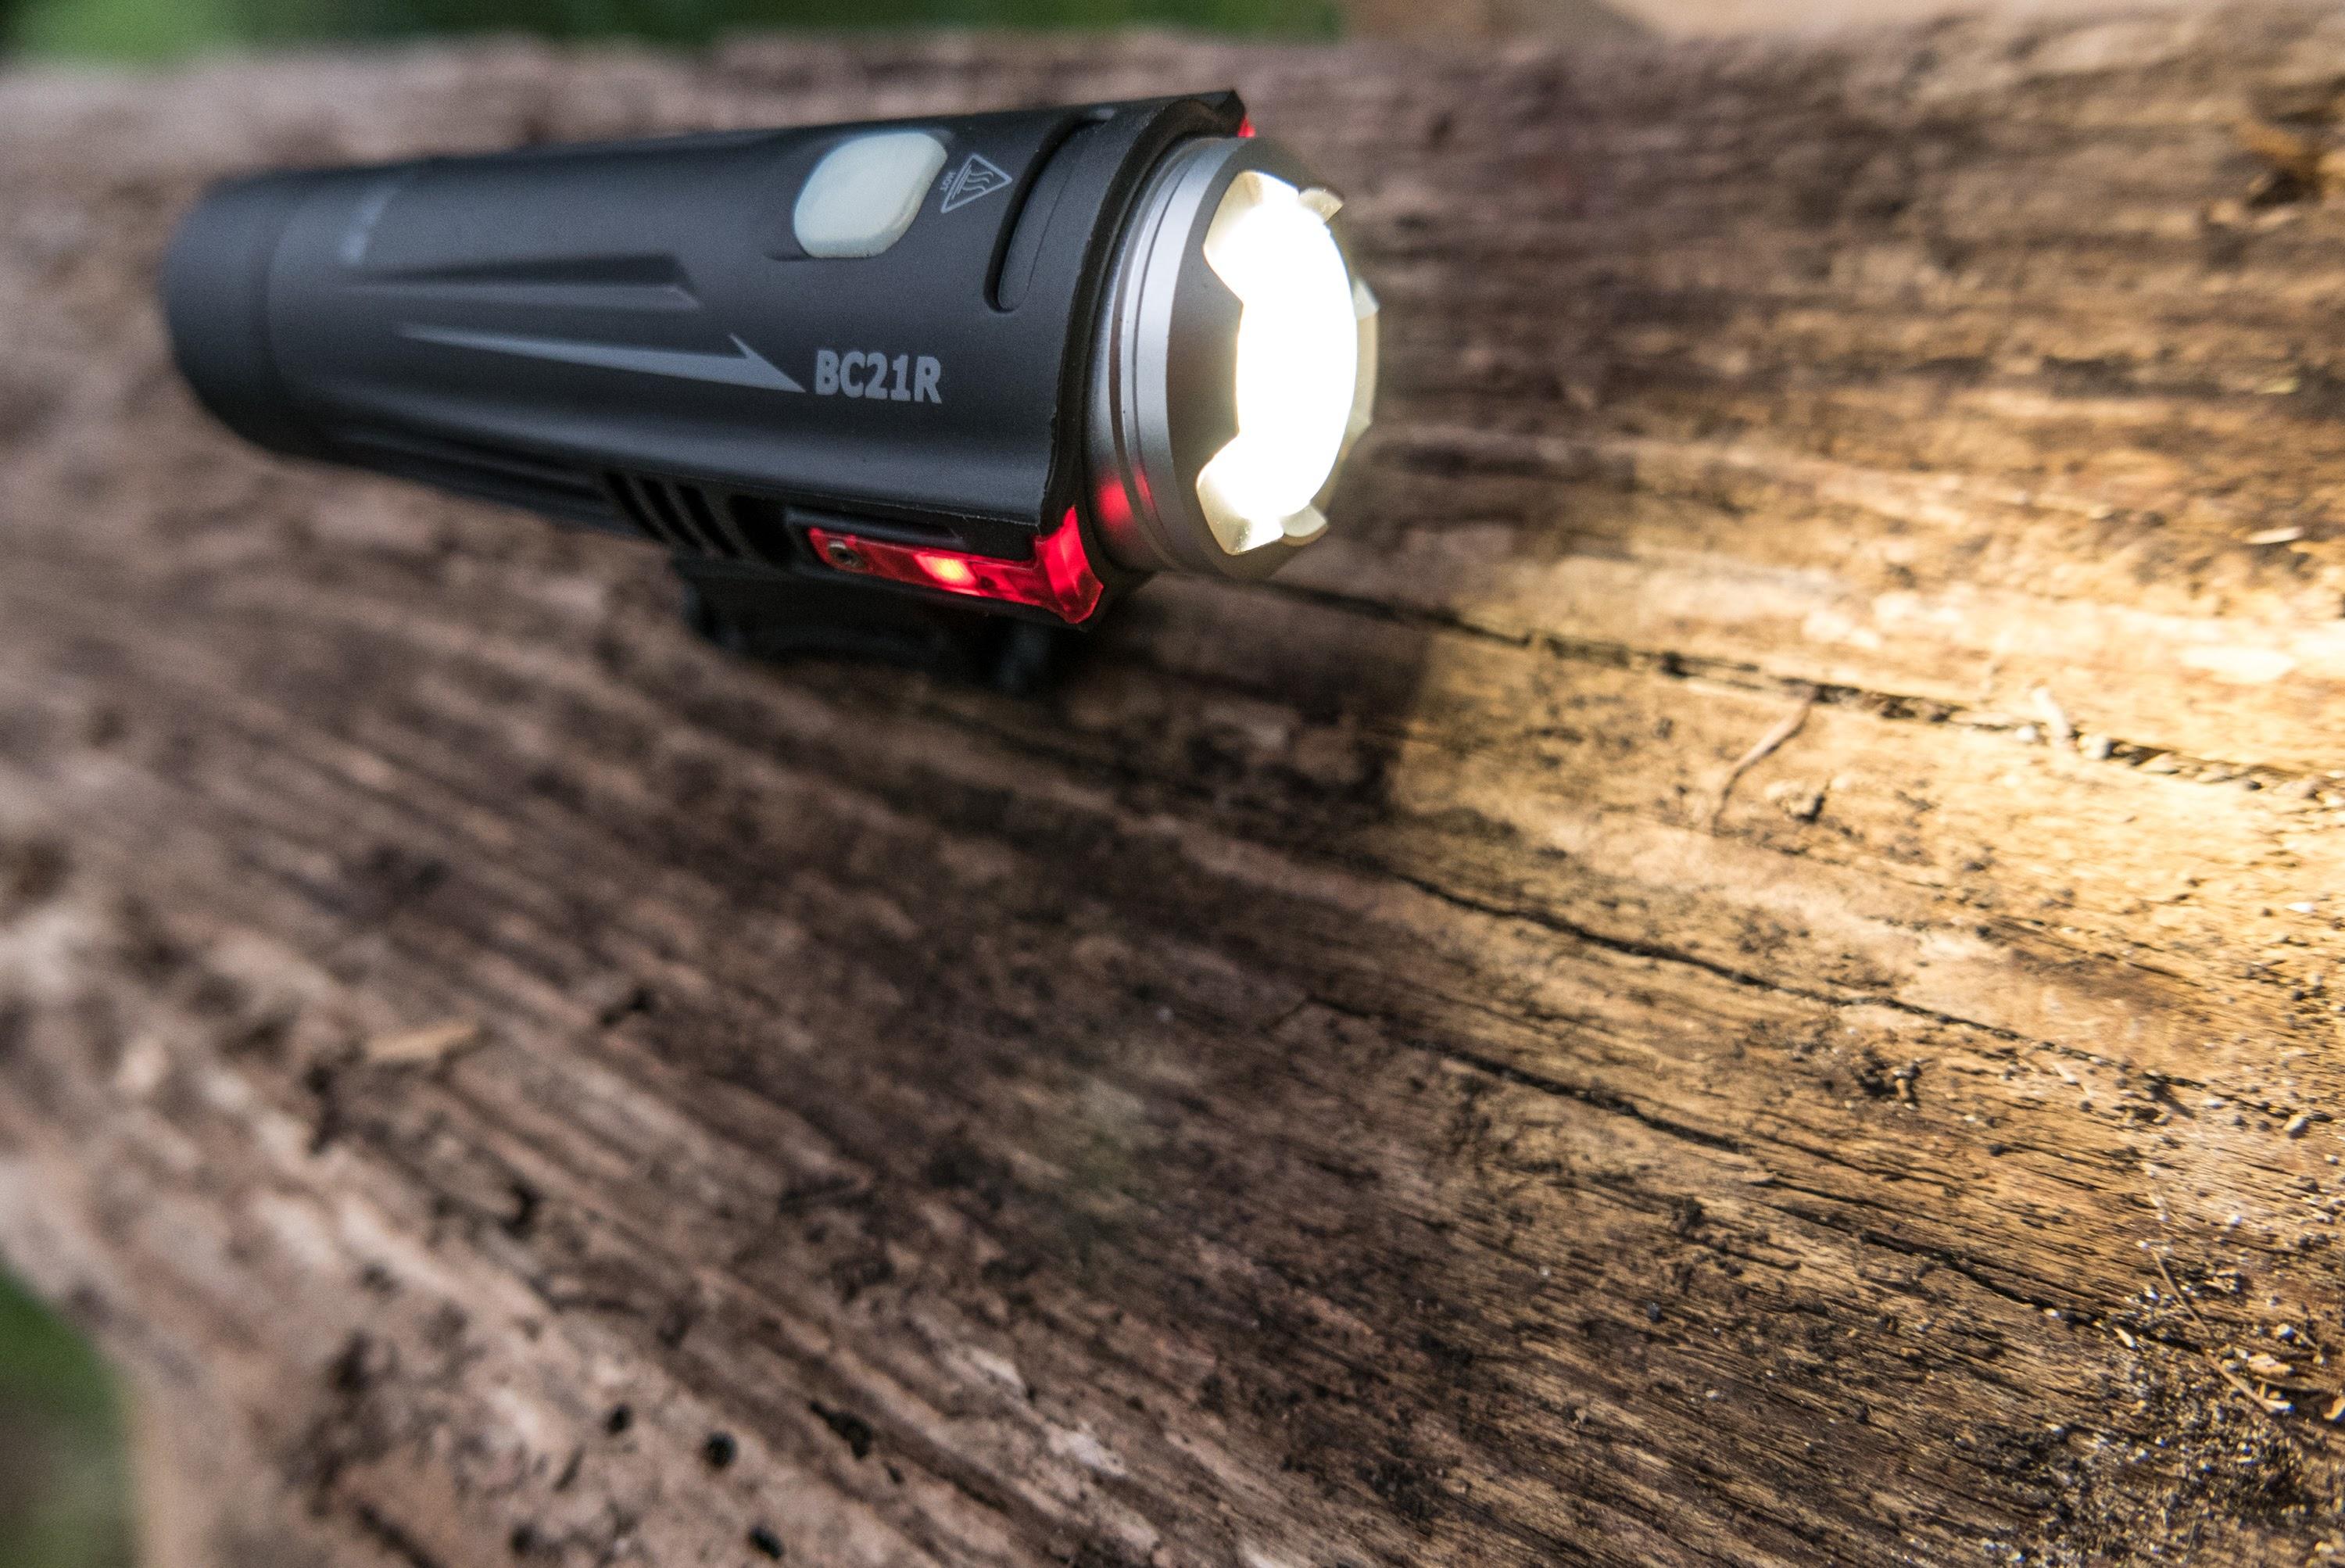 Fenix BC21R bicycle flashlight - for every occasion? – image 4